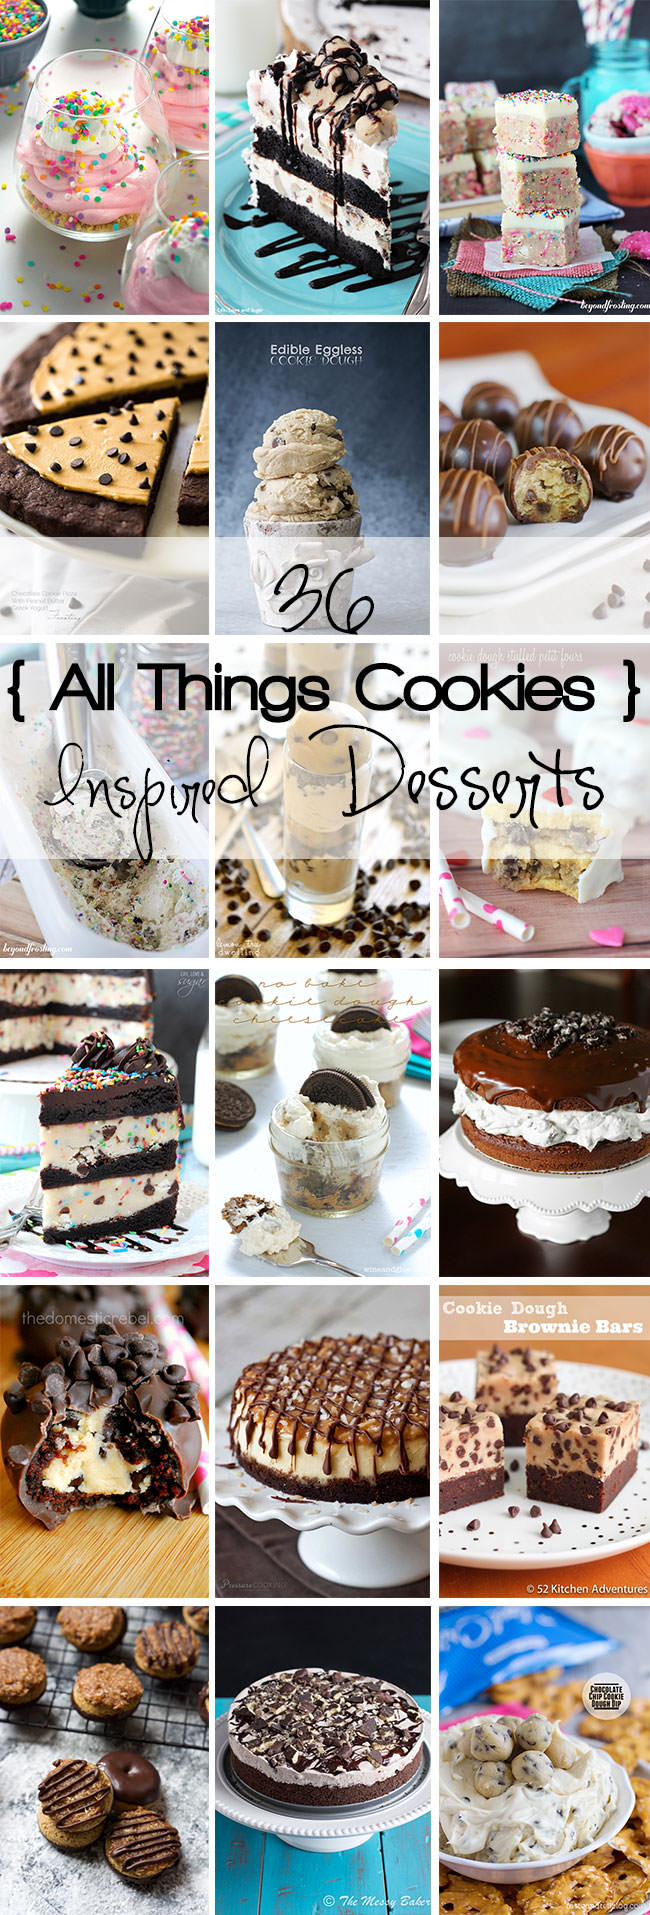 36 All Things Cookies Inspired Recipes! Not your ordinary chocolate chip cookie here. From Funfetti Cake Batter Cookie Dough Brownie Layer Cake to Cookie Dough Cups, there is something to satisfy every sweet tooth! 